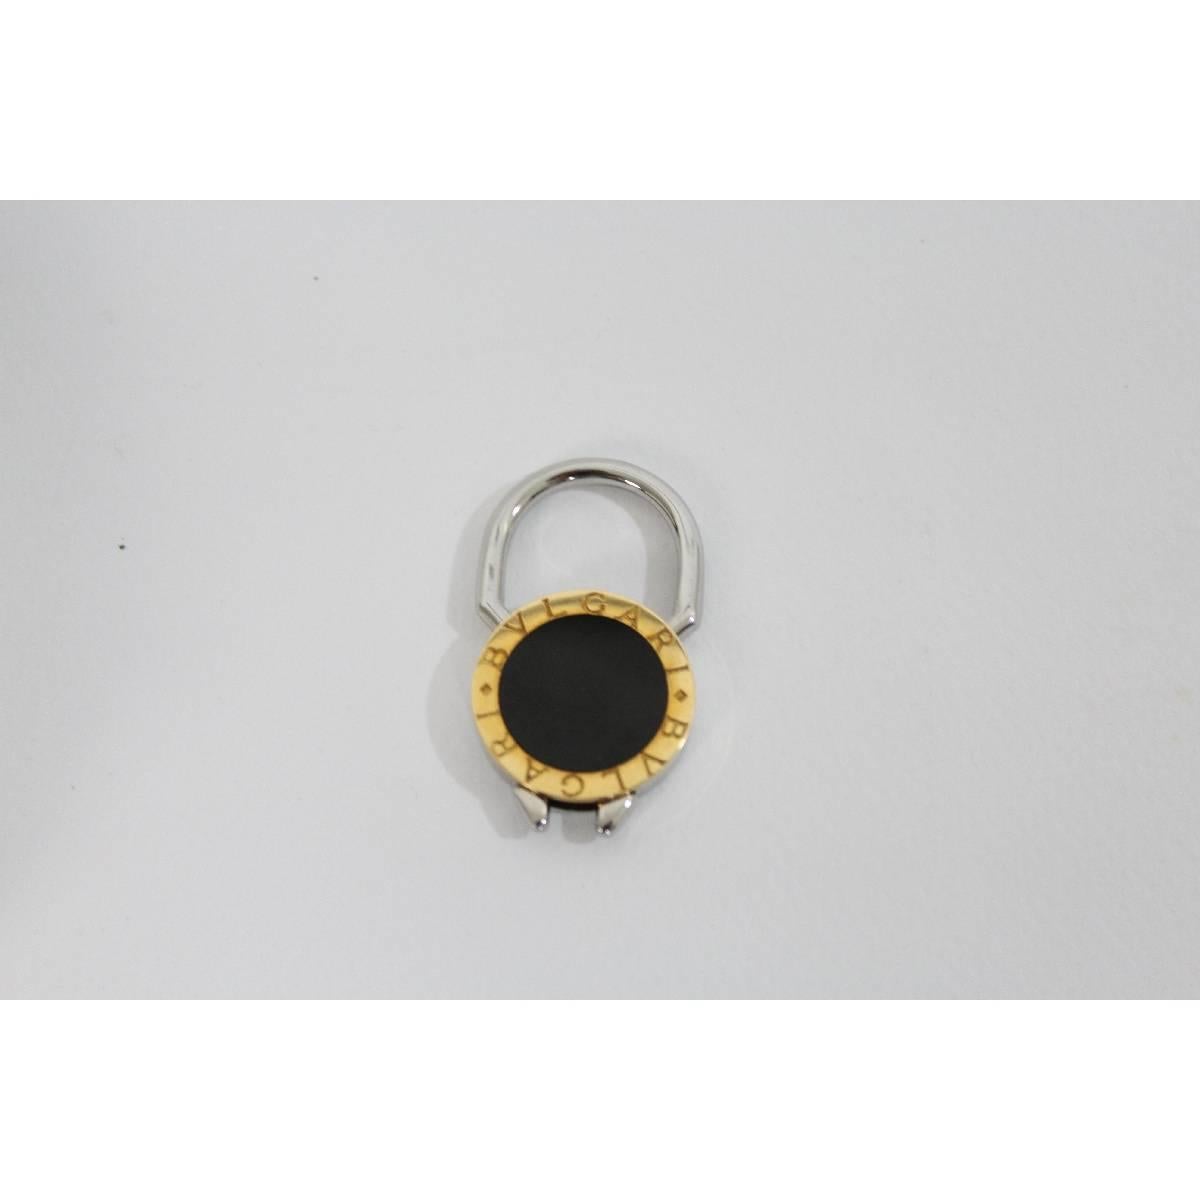 Bulgari keychain in 18 K yellow gold and onyx, steel clasp, typical inscription of the logo around the keychain case. The clip opens by pushing the two poles on the bottom. Complete with original box.  Excellent conditions.

Measure:
Length: 4